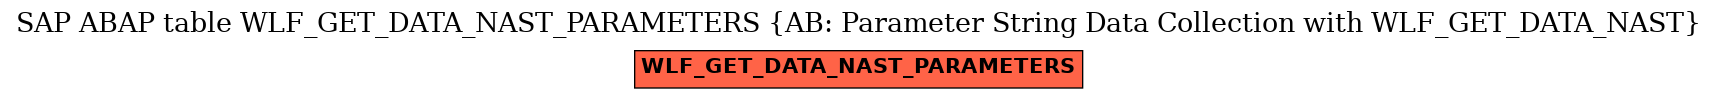 E-R Diagram for table WLF_GET_DATA_NAST_PARAMETERS (AB: Parameter String Data Collection with WLF_GET_DATA_NAST)